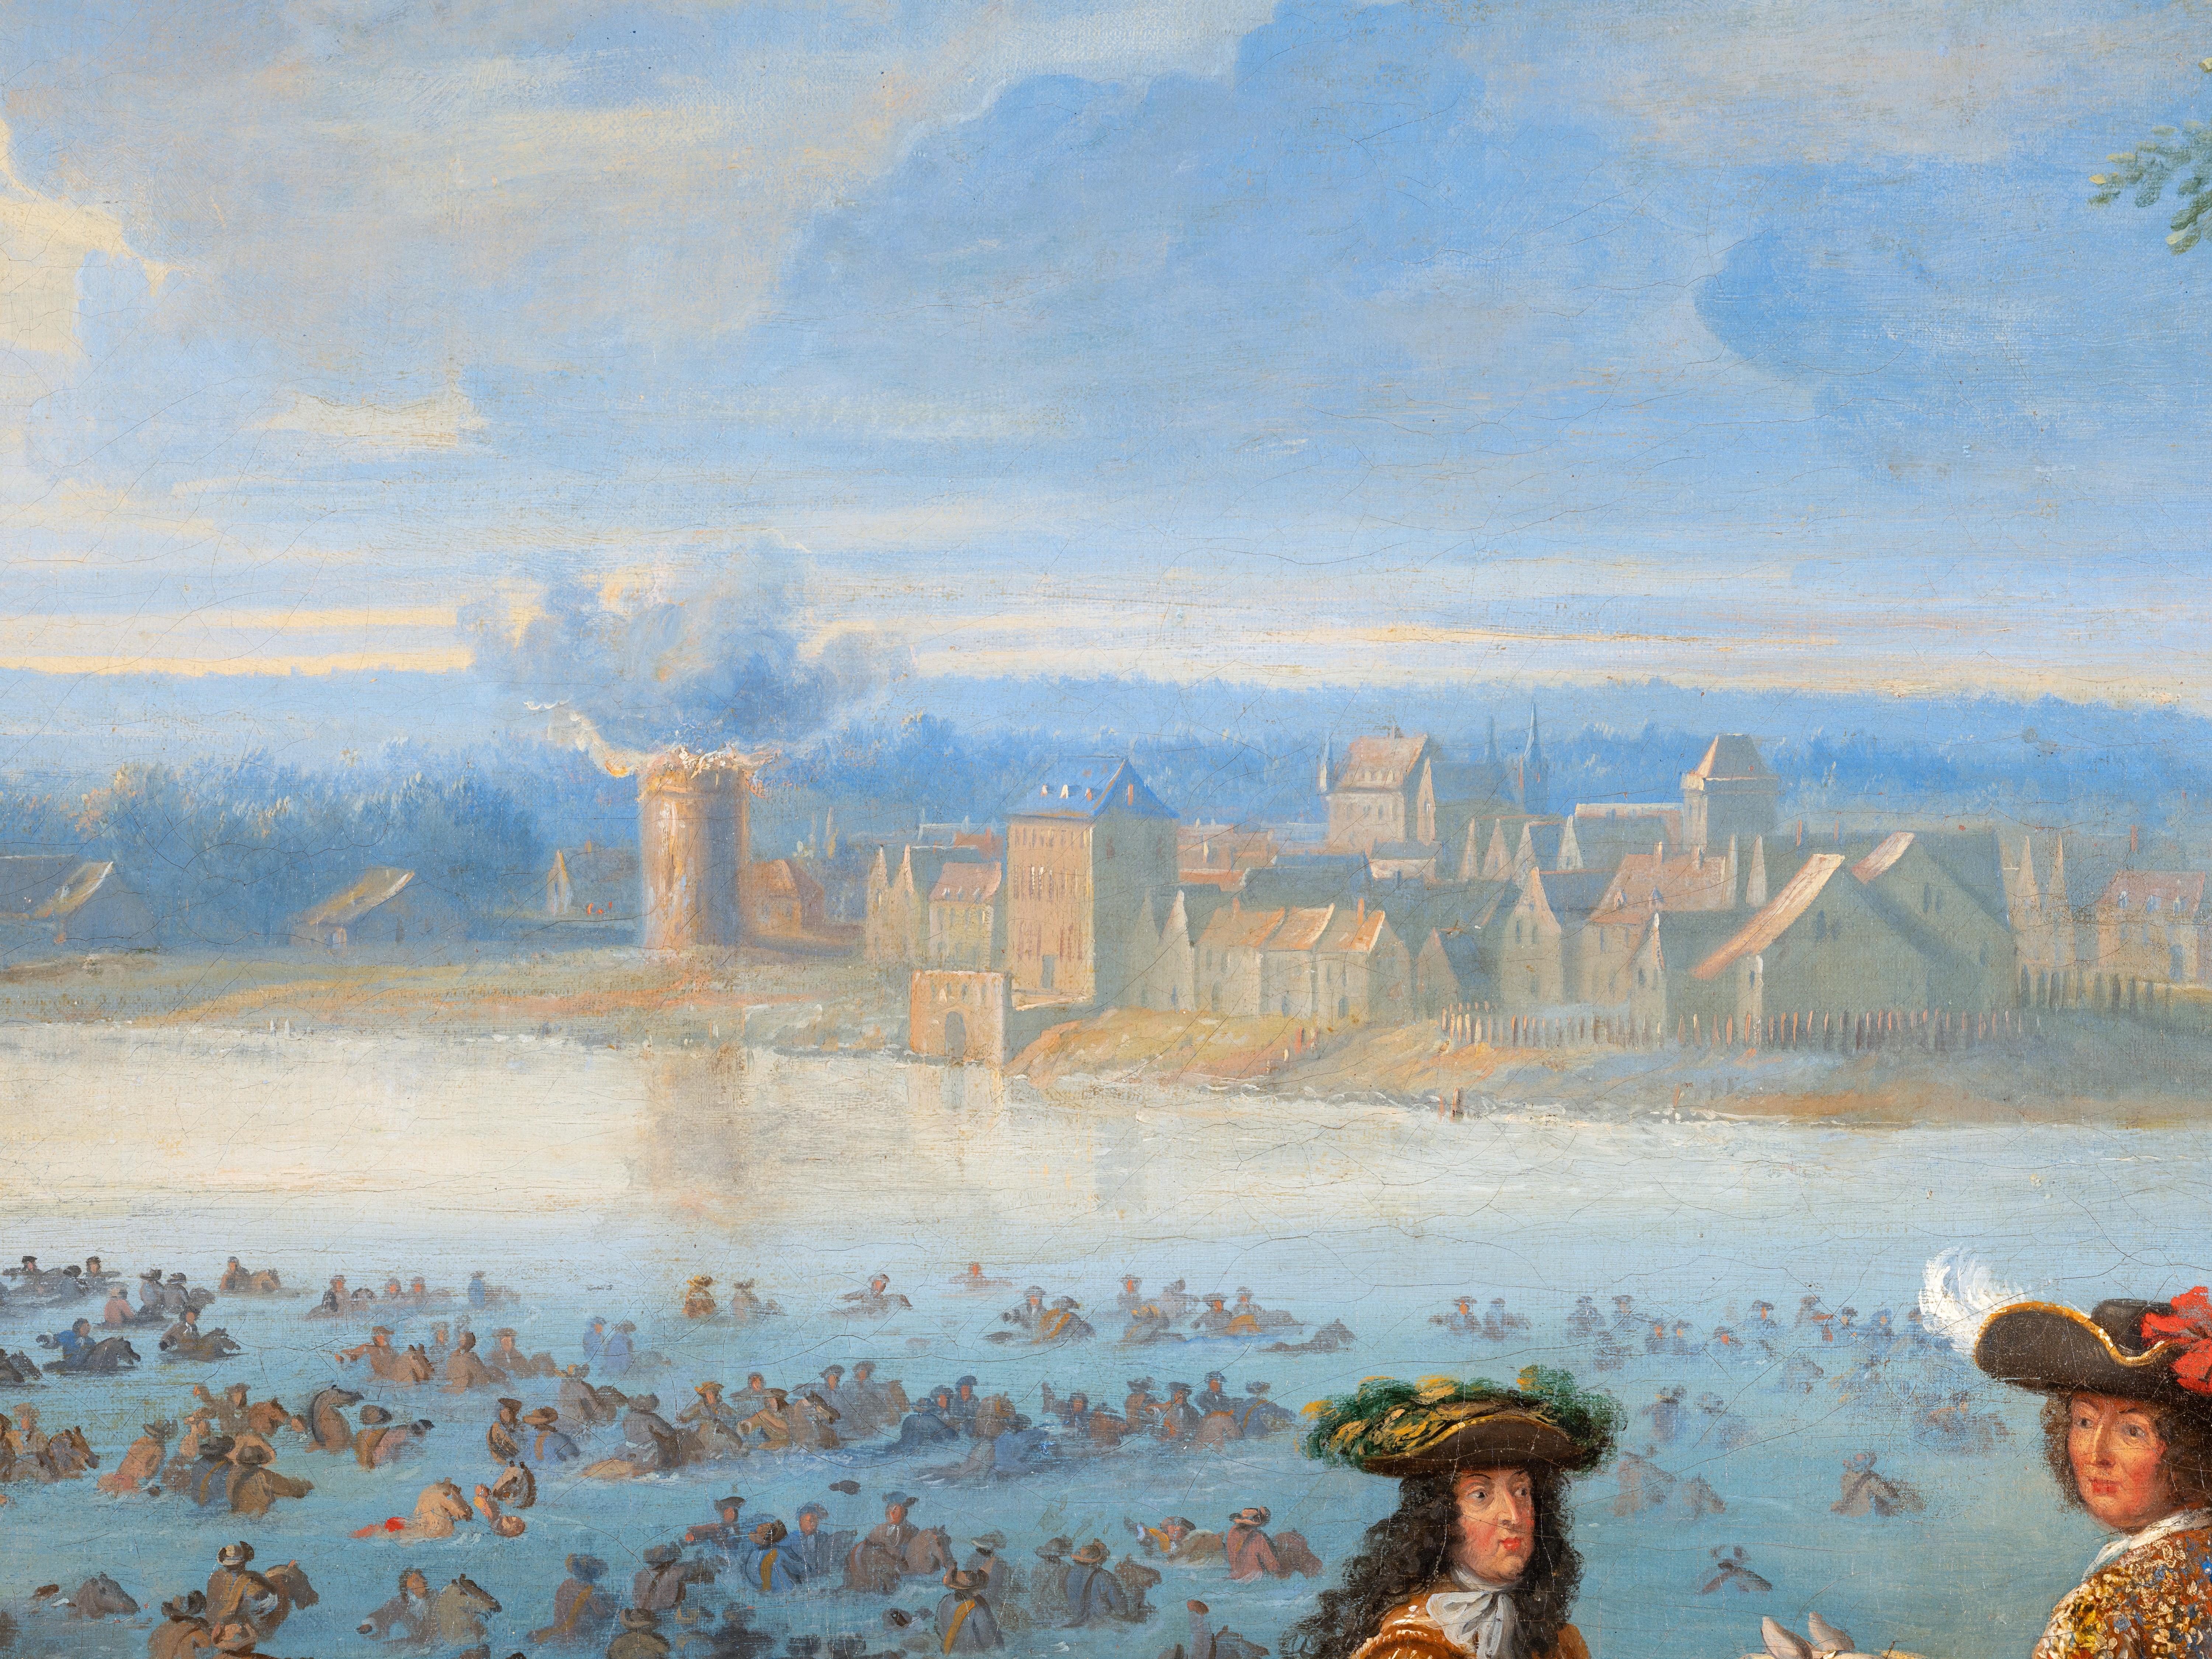 Louis XIV and his army at the crossing of the Rhine by Adam-Frans van der Meulen - Brown Figurative Painting by Adam Frans van der Meulen